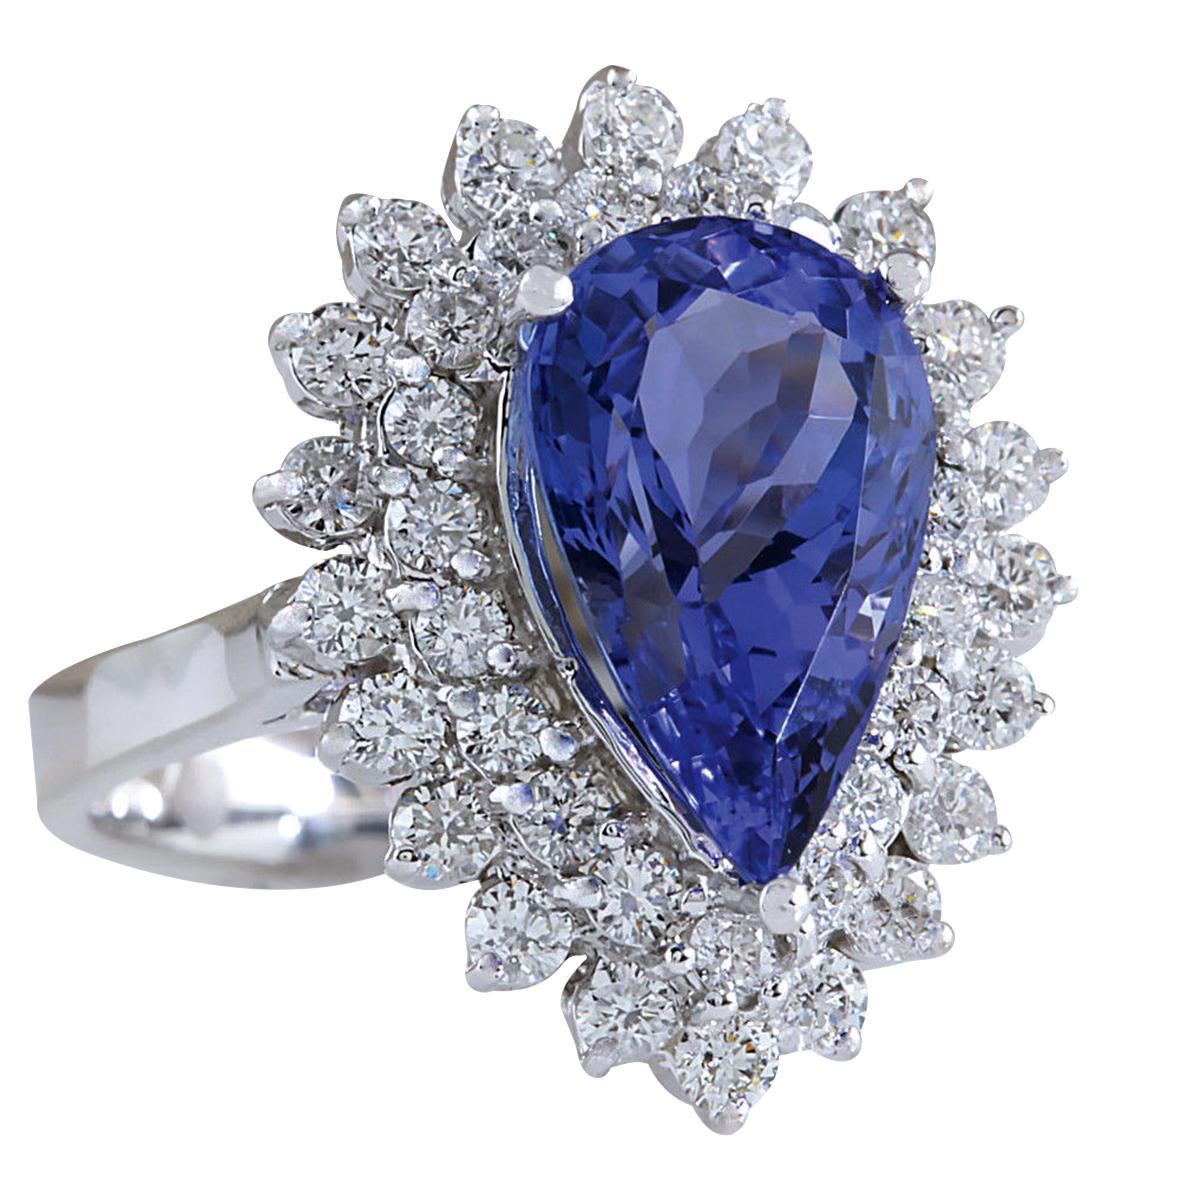 Discover unparalleled beauty with our stunning 5.73 Carat Natural Tanzanite Ring, crafted delicately in 14 Karat White Gold. This exquisite piece, weighing a total of 6.5 grams, showcases a magnificent Tanzanite gemstone weighing 4.58 carats,